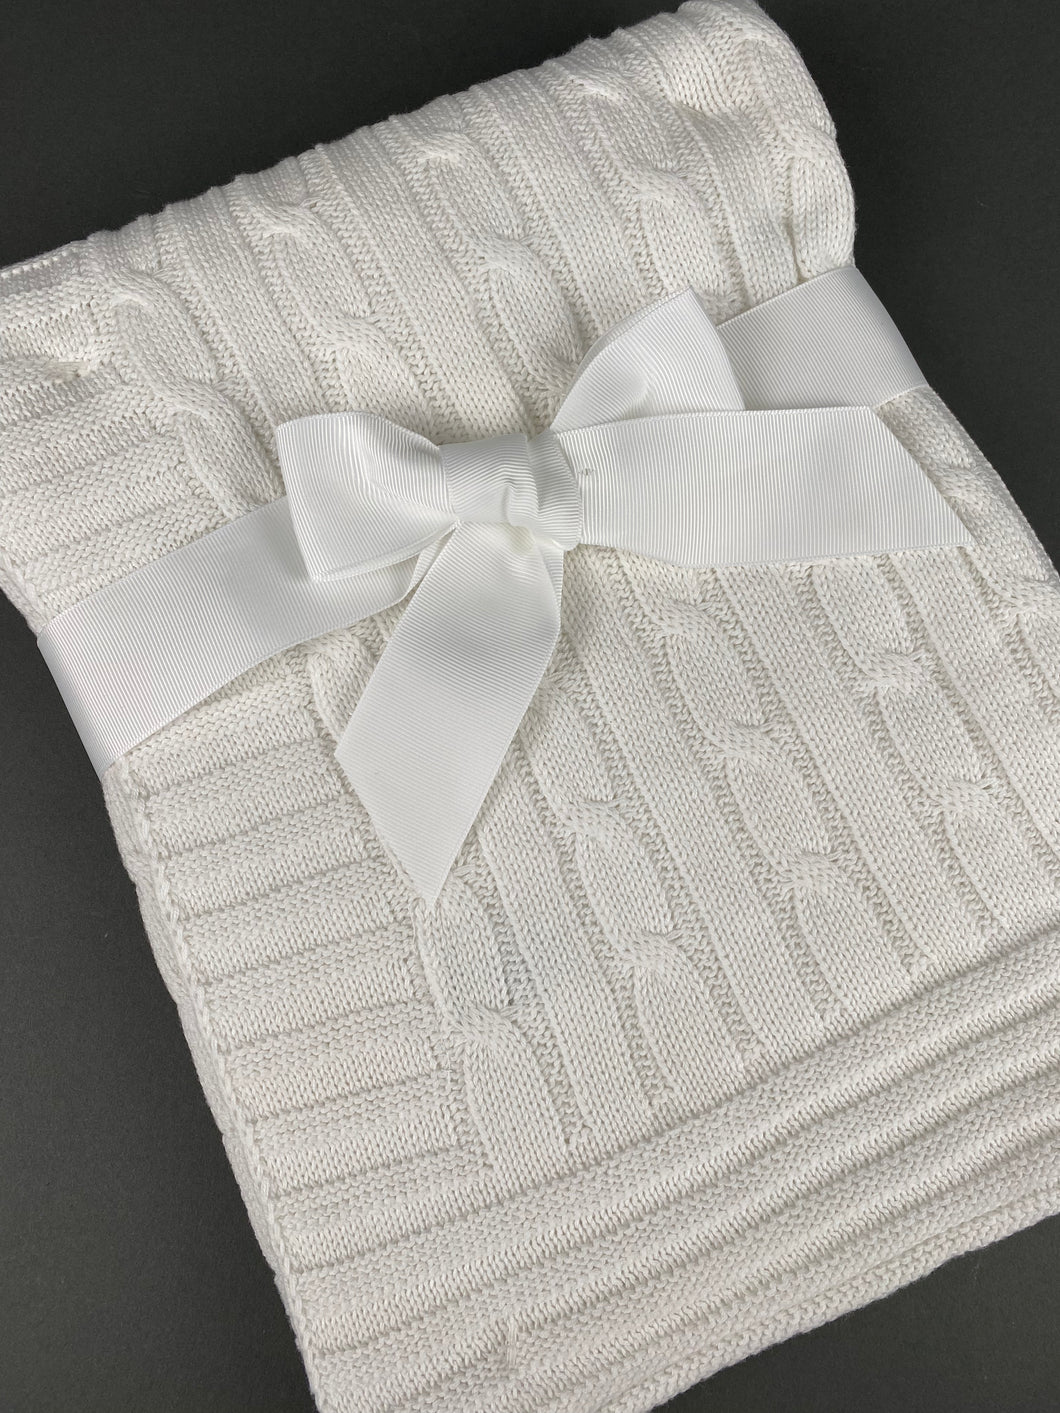 White Knitted Blanket WB1 100% Cotton